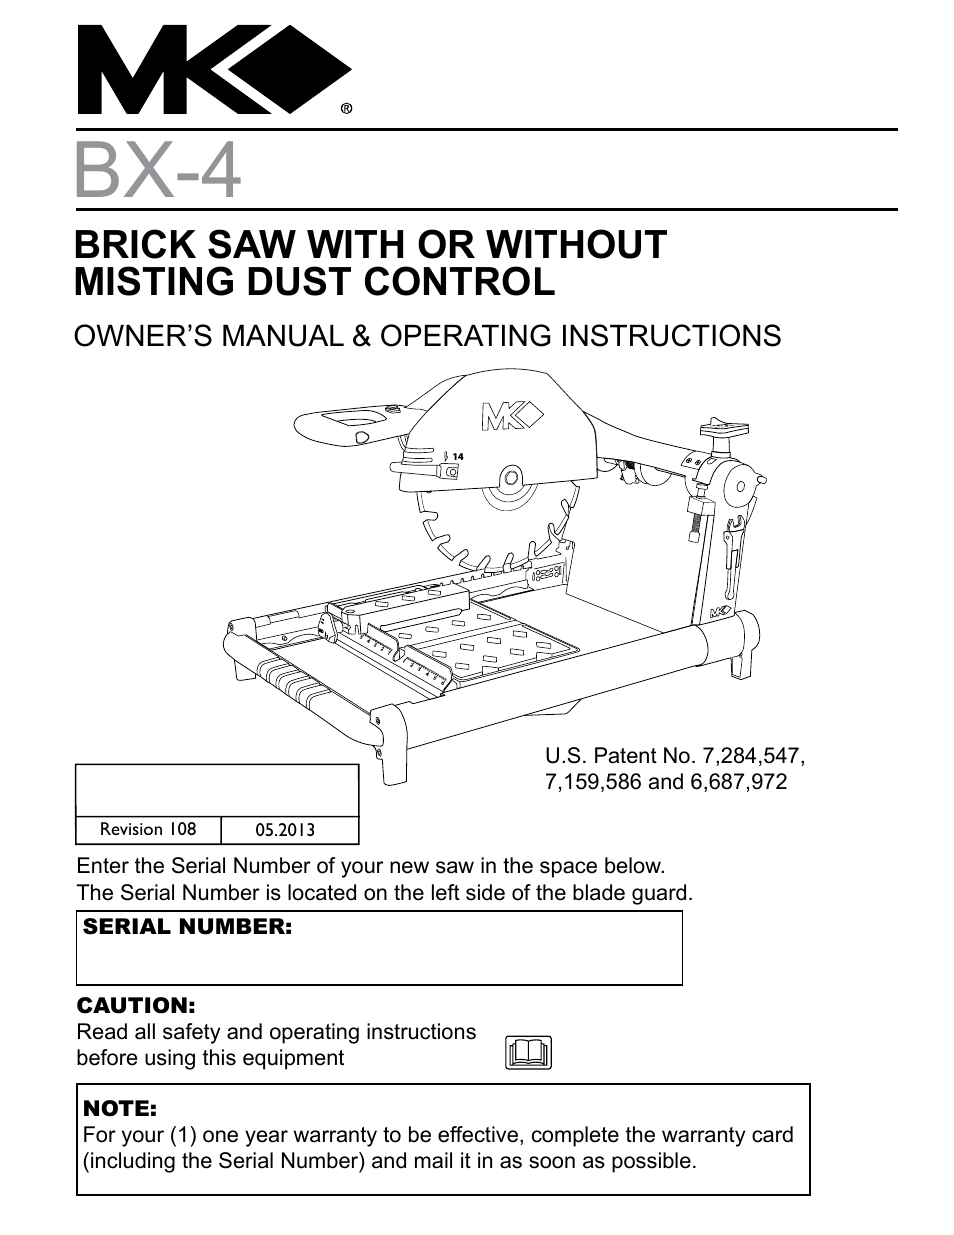 BX-4 BRICK SAW WITH OR WITHOUT MISTING DUST CONTROL